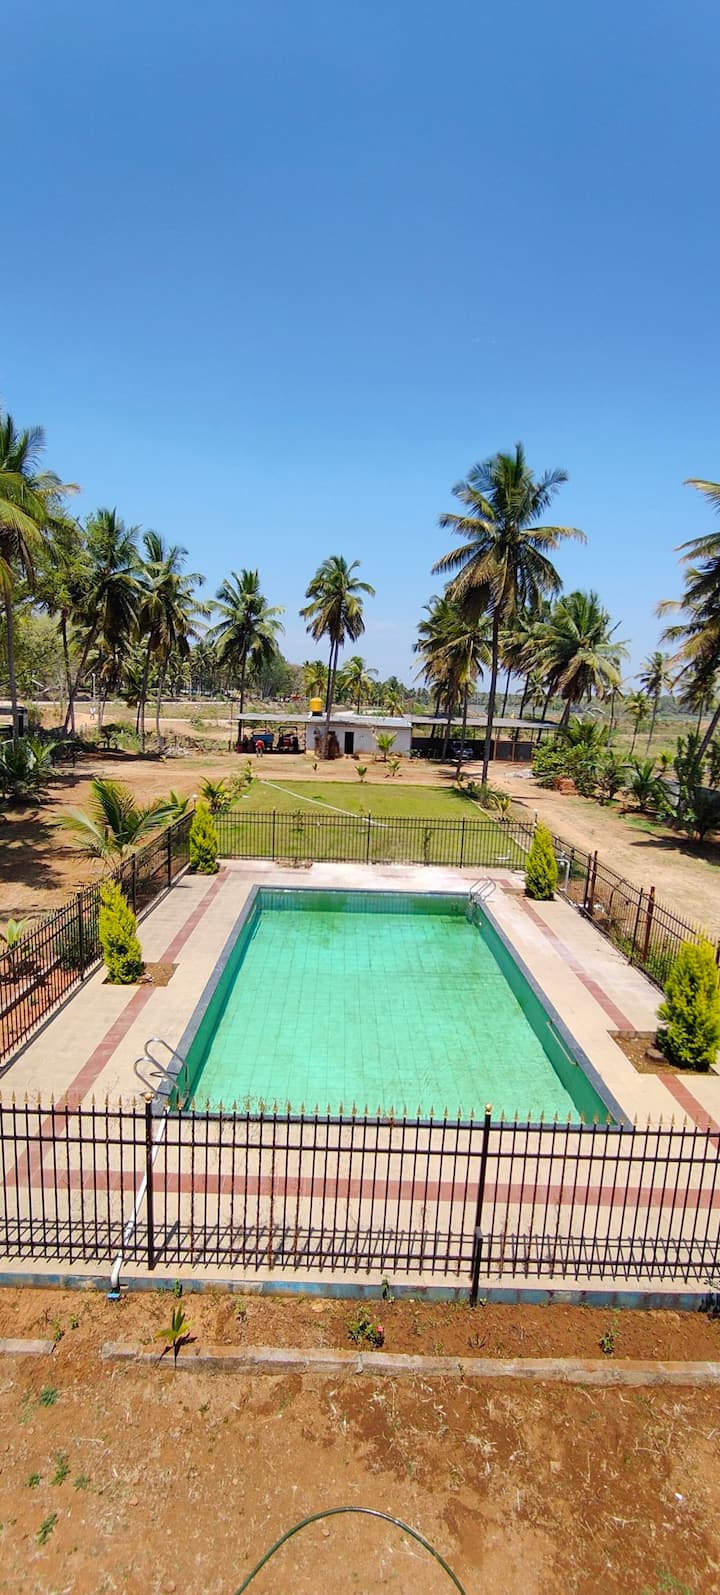 Stay At A Farmhouse With A Poolside View! - Kanakapura